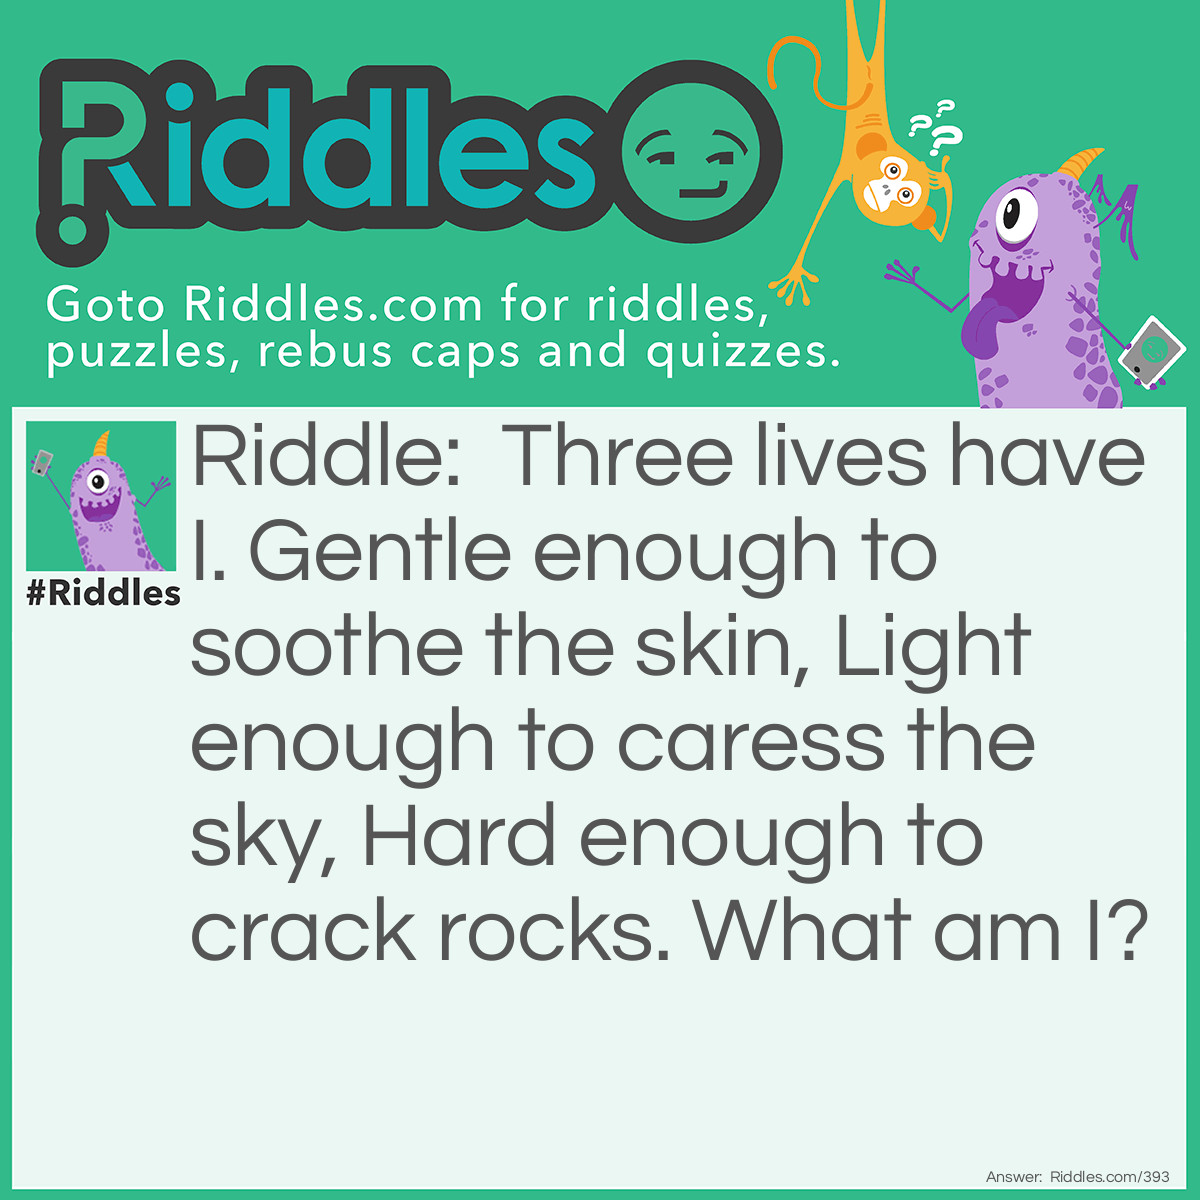 Riddle: Three lives have I. Gentle enough to soothe the skin, Light enough to caress the sky, Hard enough to crack rocks. What am I? Answer: Water. Explanation: Water can be in the form of a liquid, solid (ice), and/or a gas (water vapor) which is represented by "three lives".  As a liquid, it is used to bathe, as a gas it creates clouds that float in the sky, and as a solid (ice), it can split rocks or create glaciers that scour the earth as they move downhill.